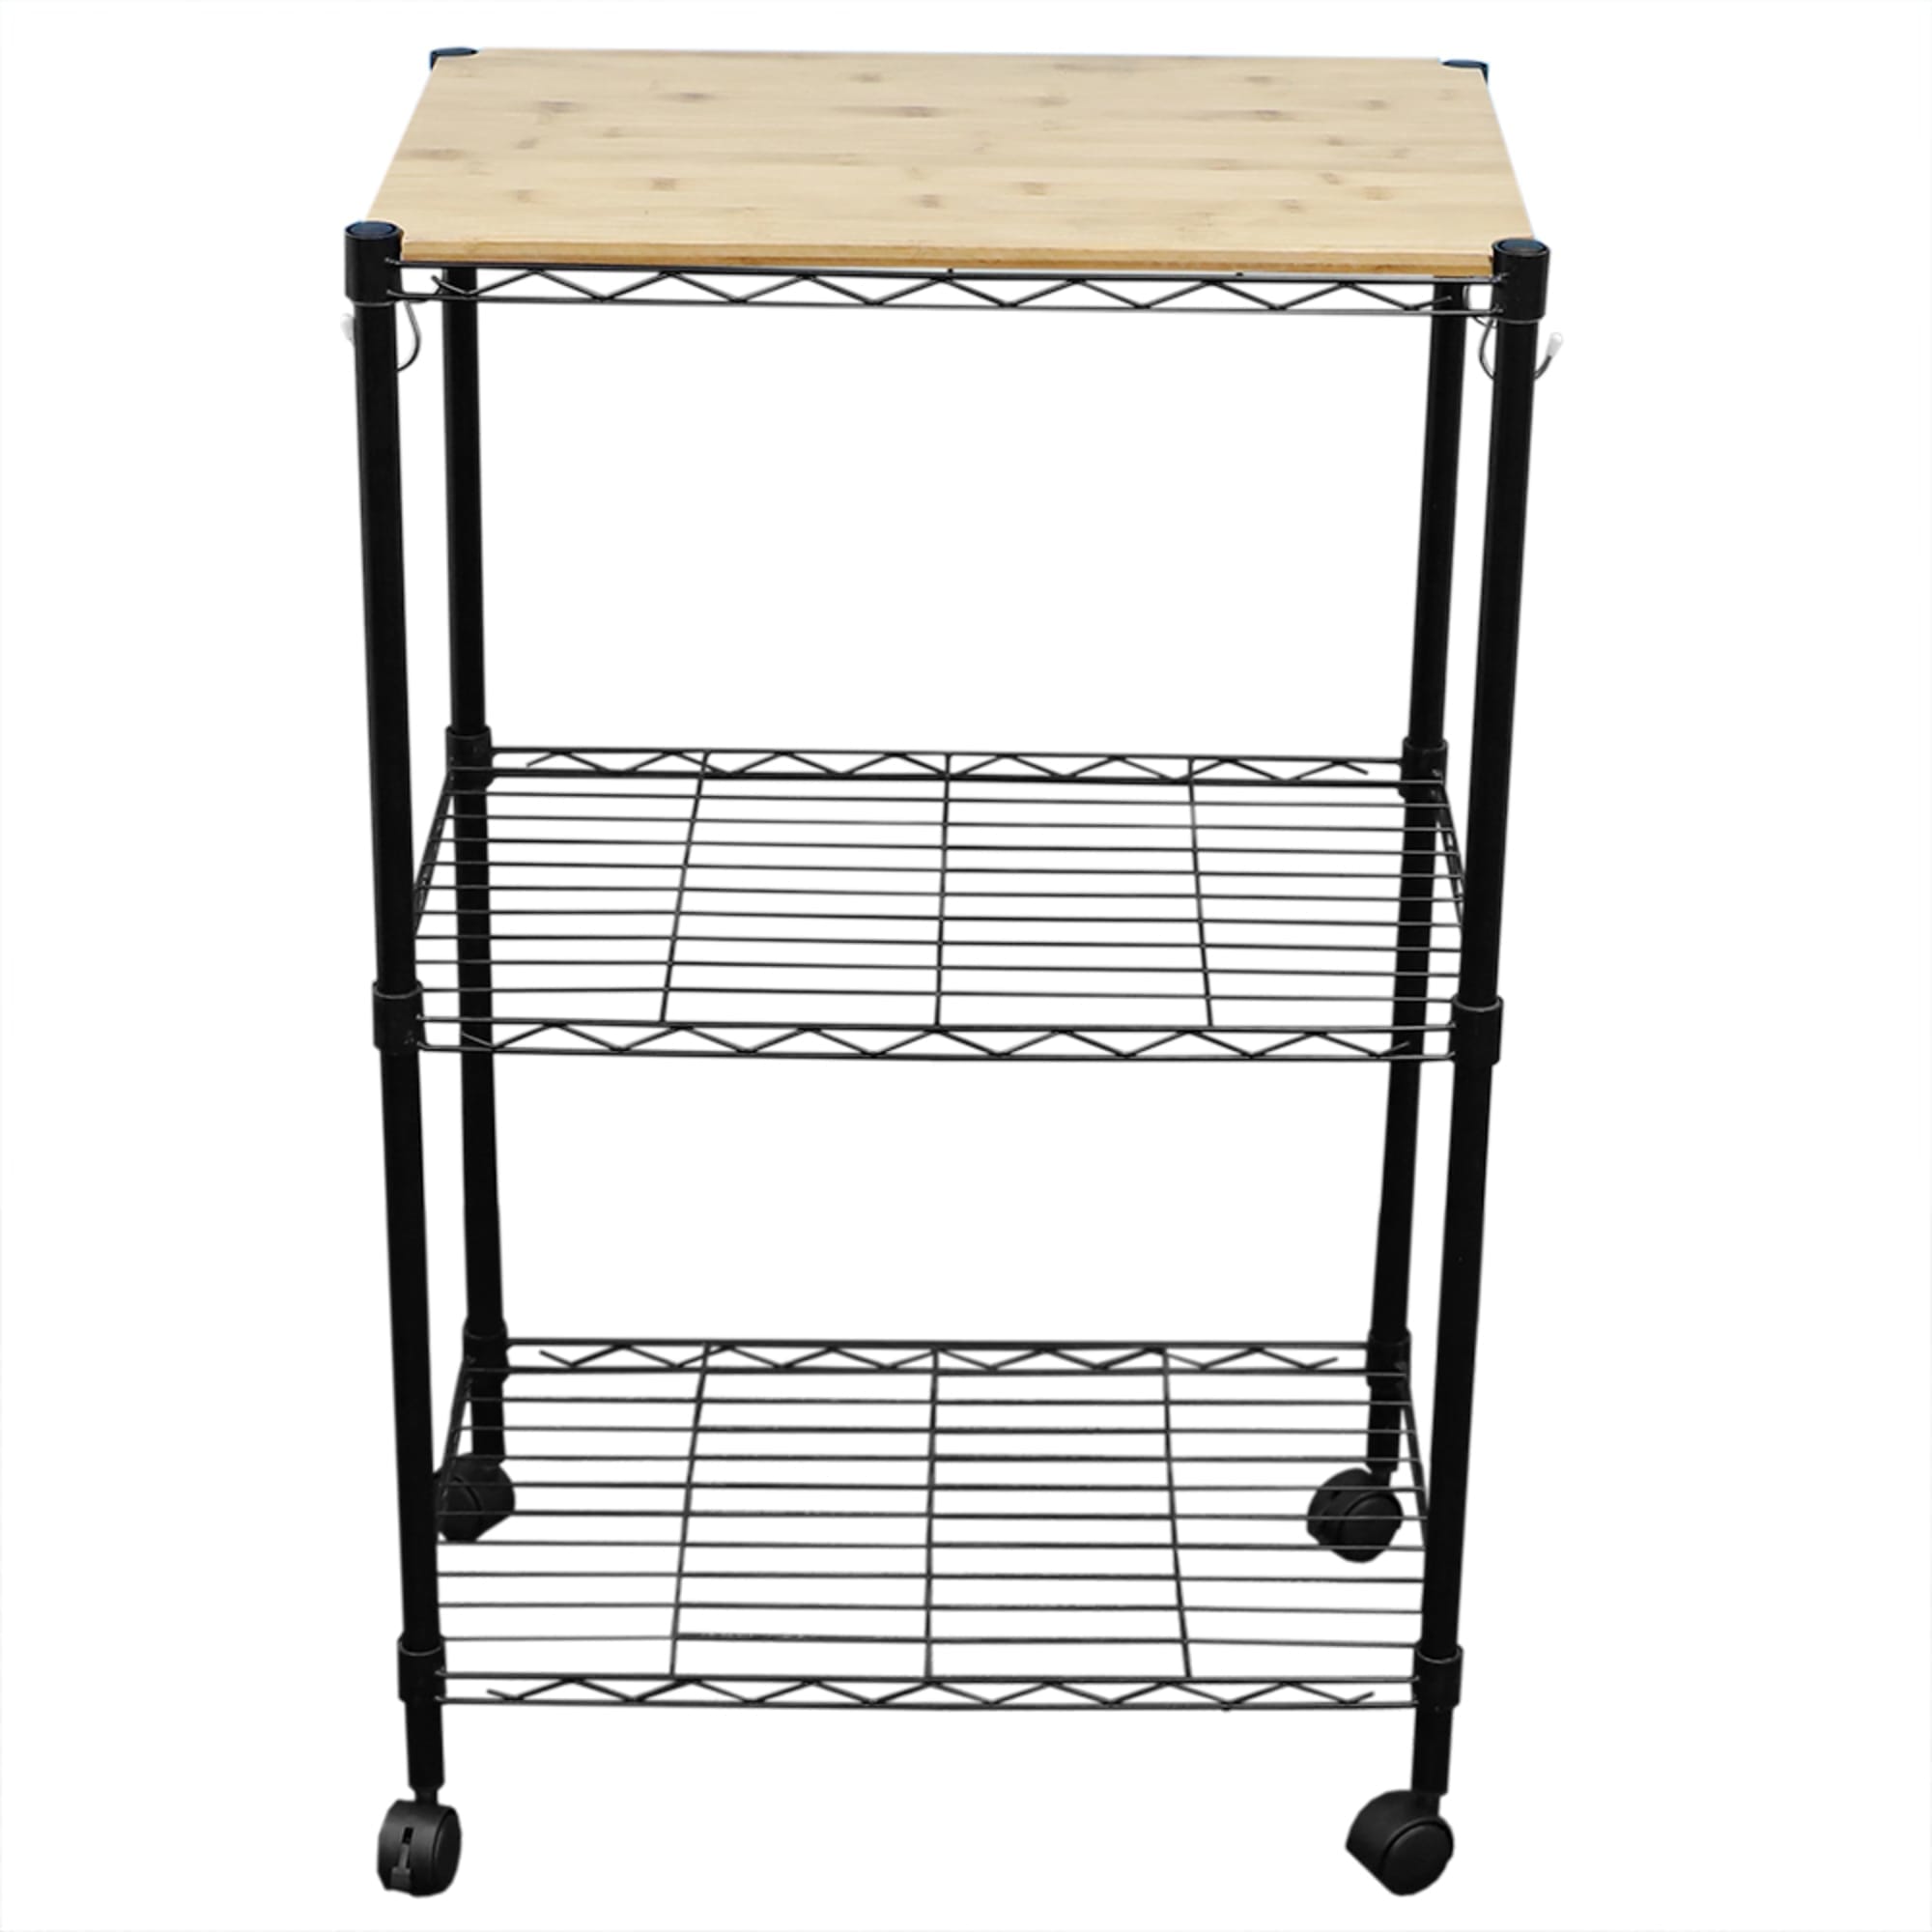 Home Basics 3 Tier MDF Top Kitchen Trolley with Hooks $50.00 EACH, CASE PACK OF 1